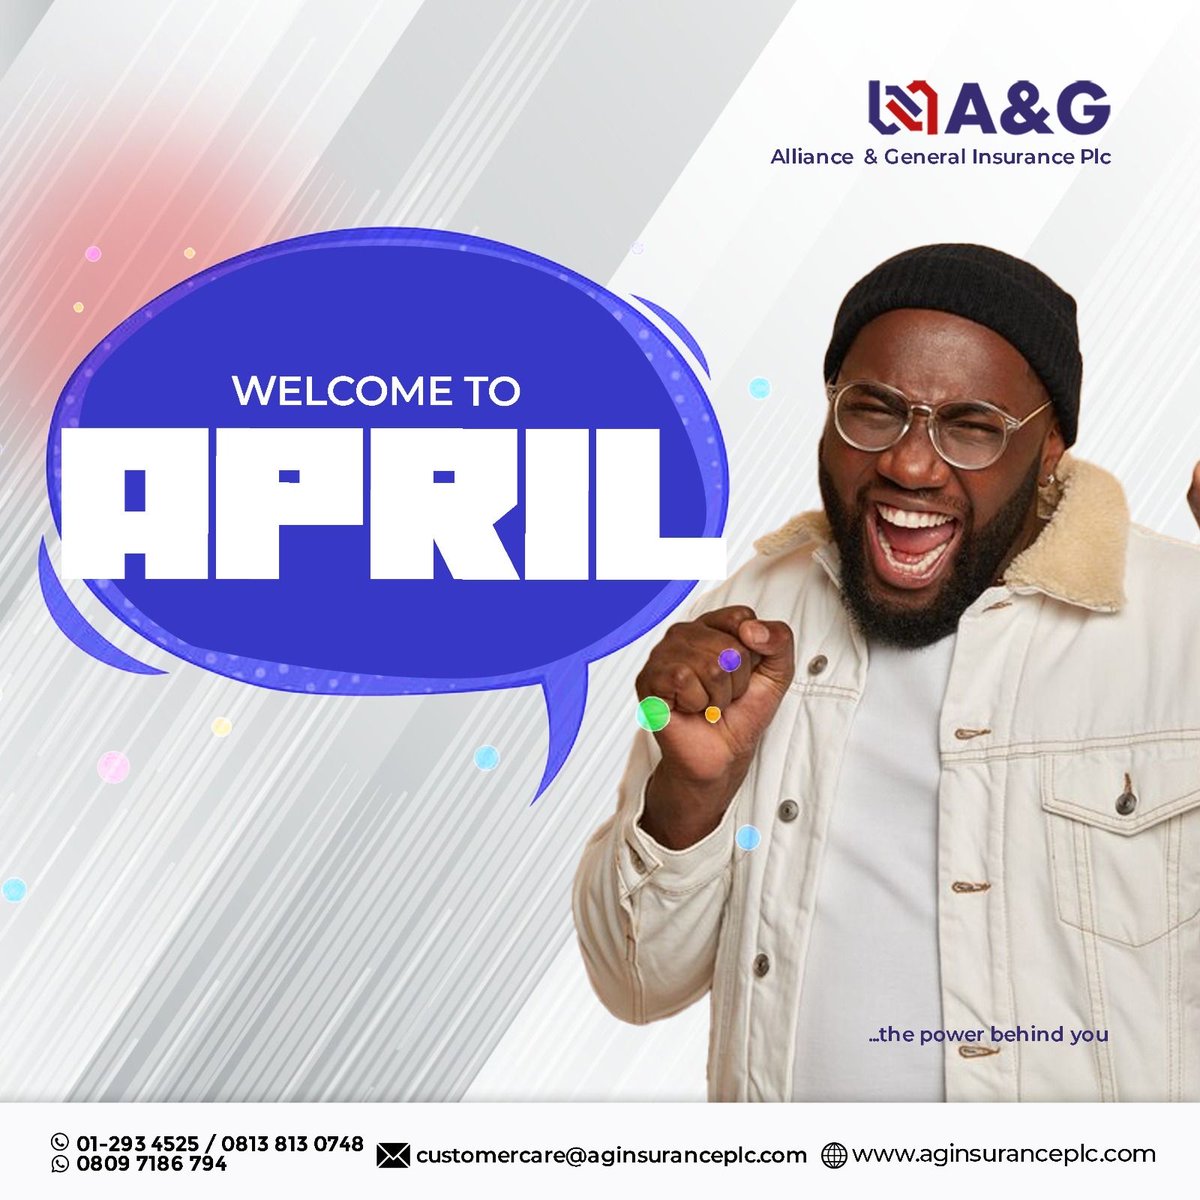 Happy New Month! 

Wishing all our valued clients and followers a month filled with prosperity, peace, and protection. 

Let's make this month one to remember together. 

#AllianceInsurance #NewMonth #AprilWishes